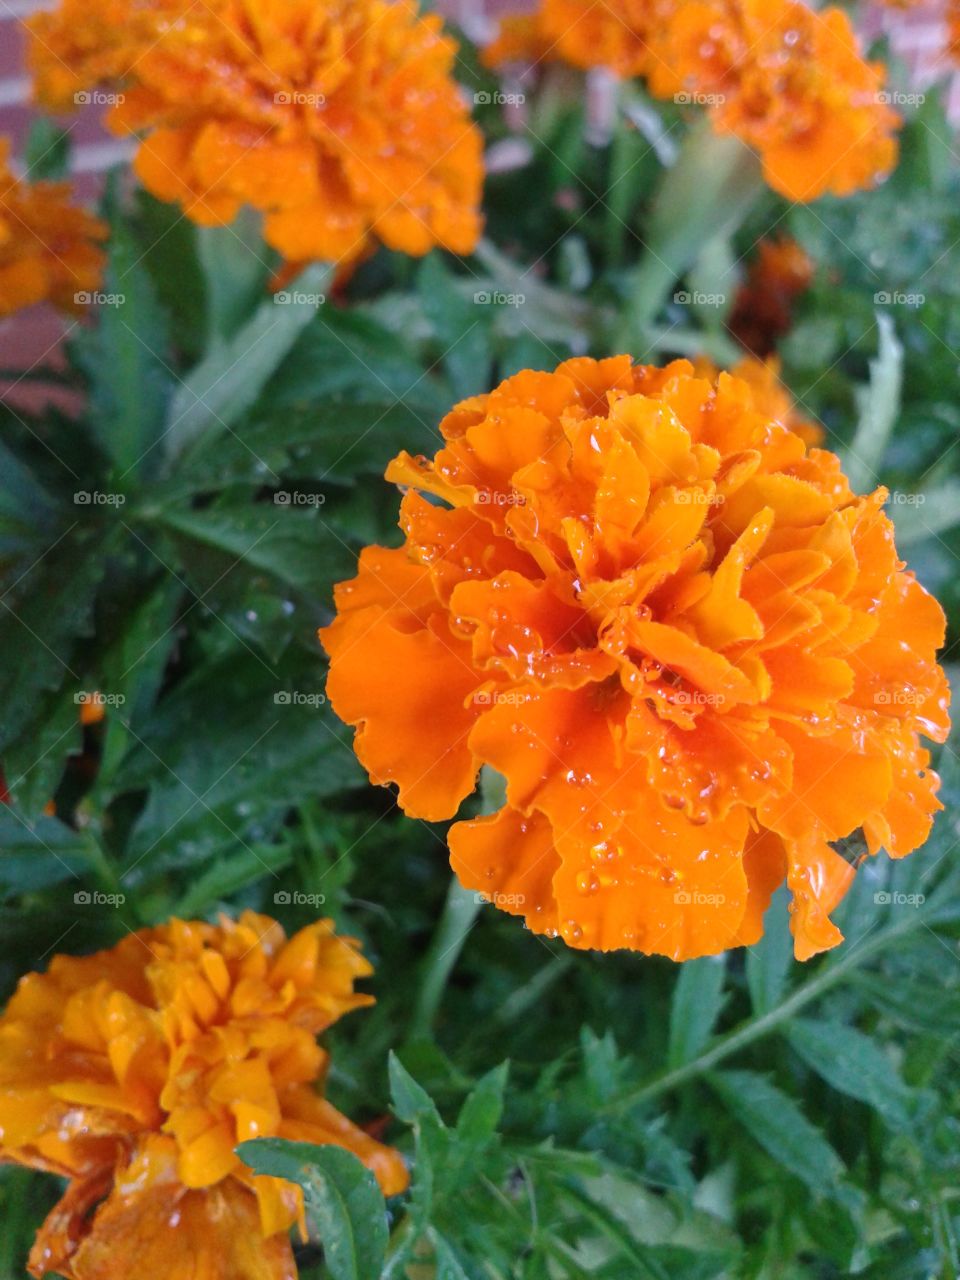 The humble Marigold. A simple charmer that always pleases the gardener.